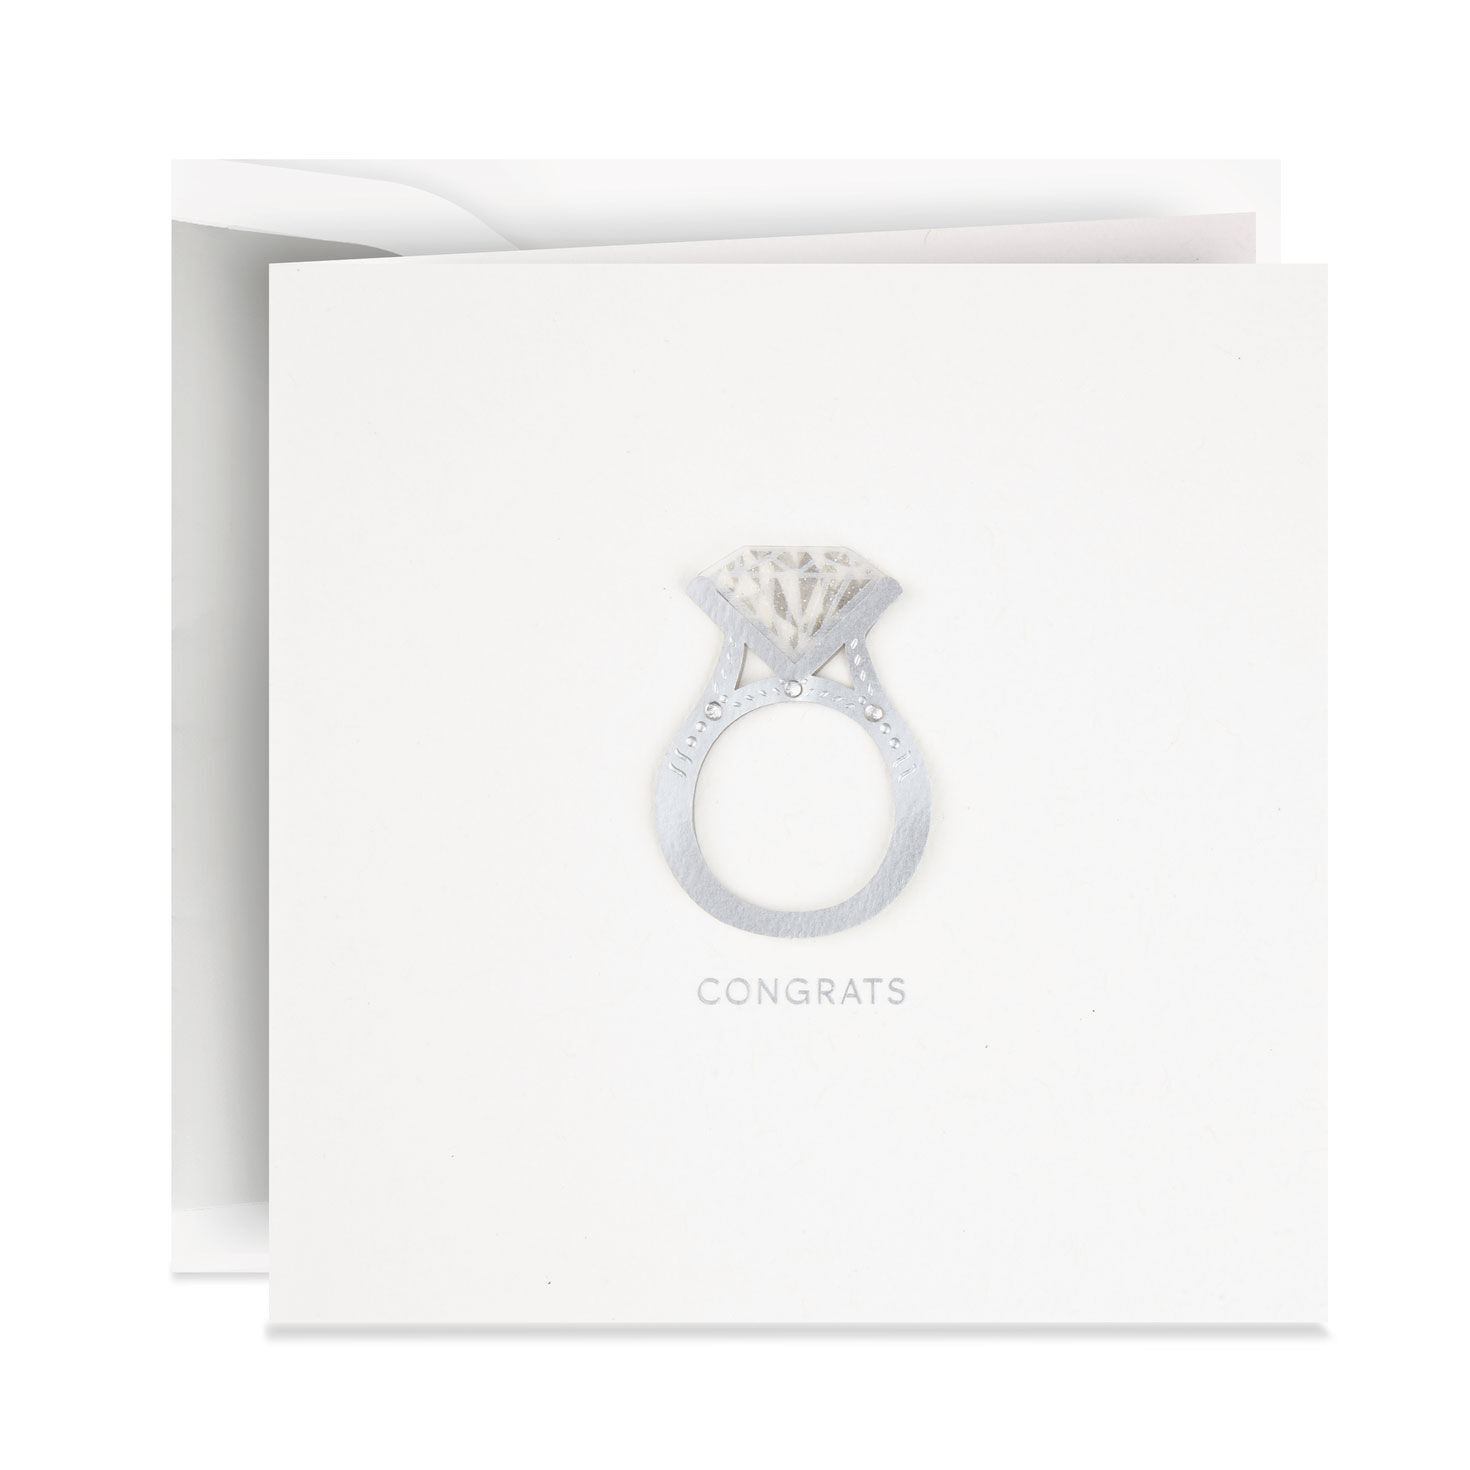 Diamond Ring Engagement Congratulations Card for only USD 6.99 | Hallmark